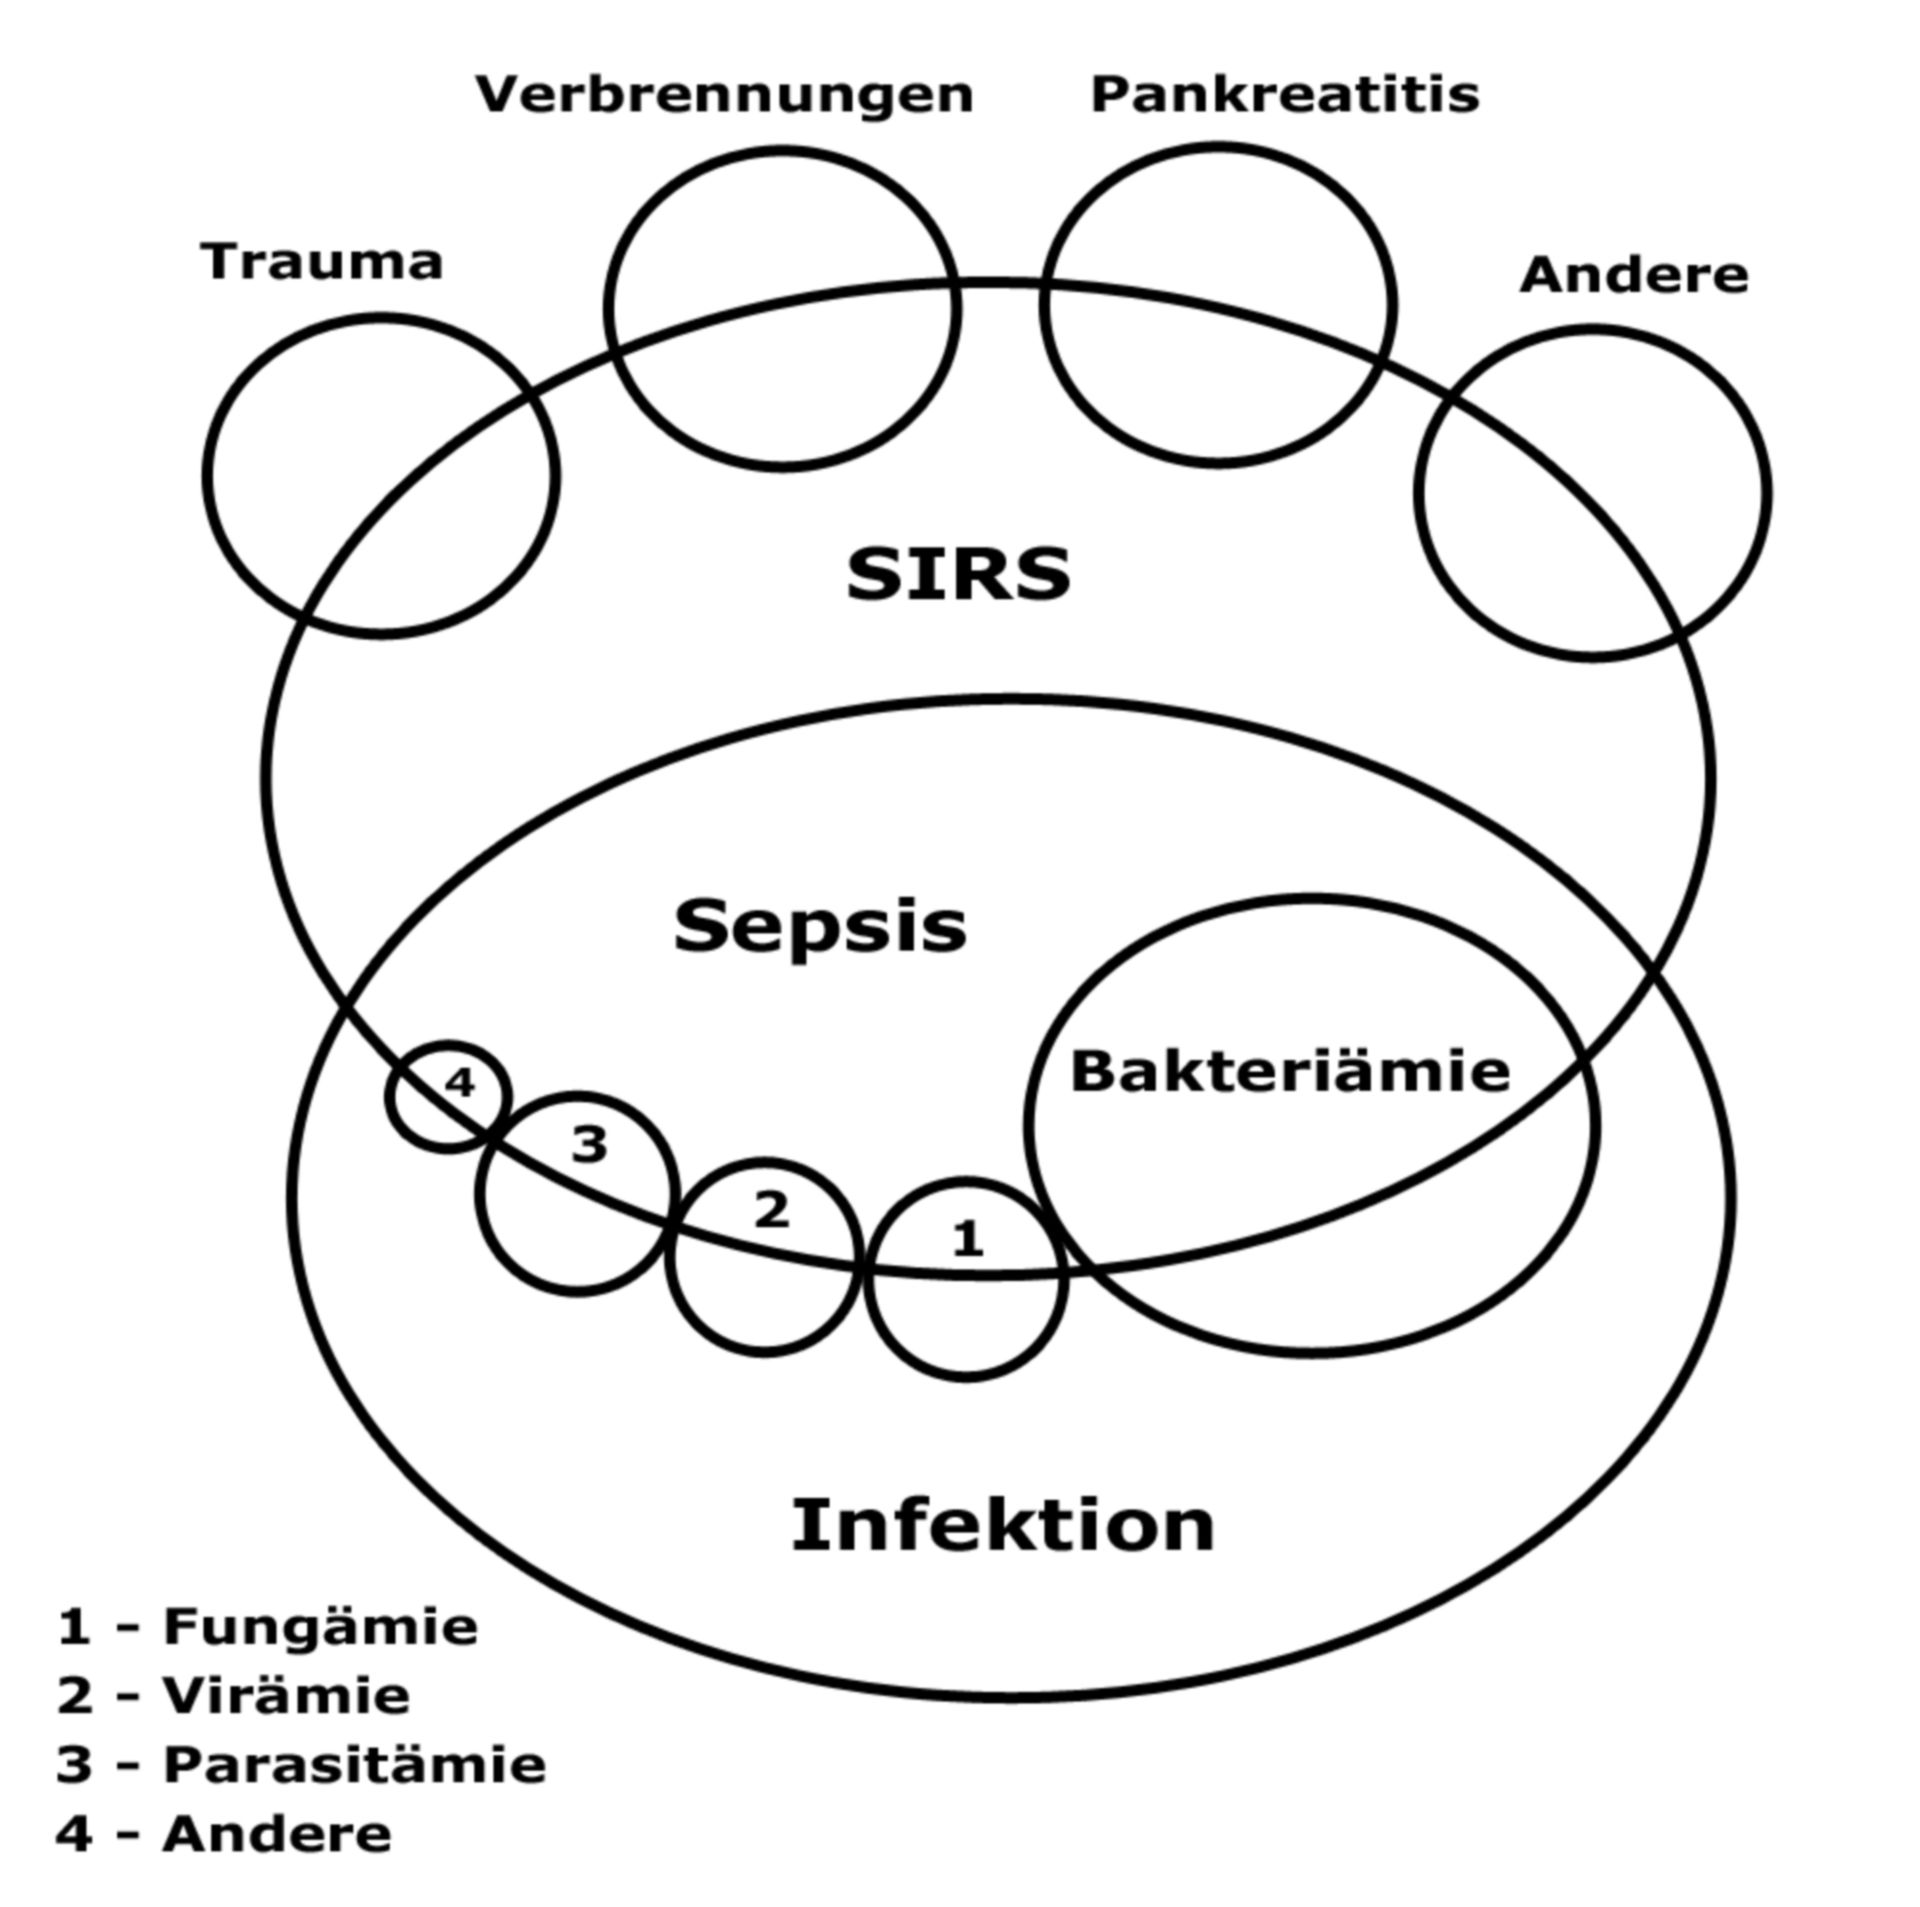 Infection, Sepsis, and SIRS (scheme)